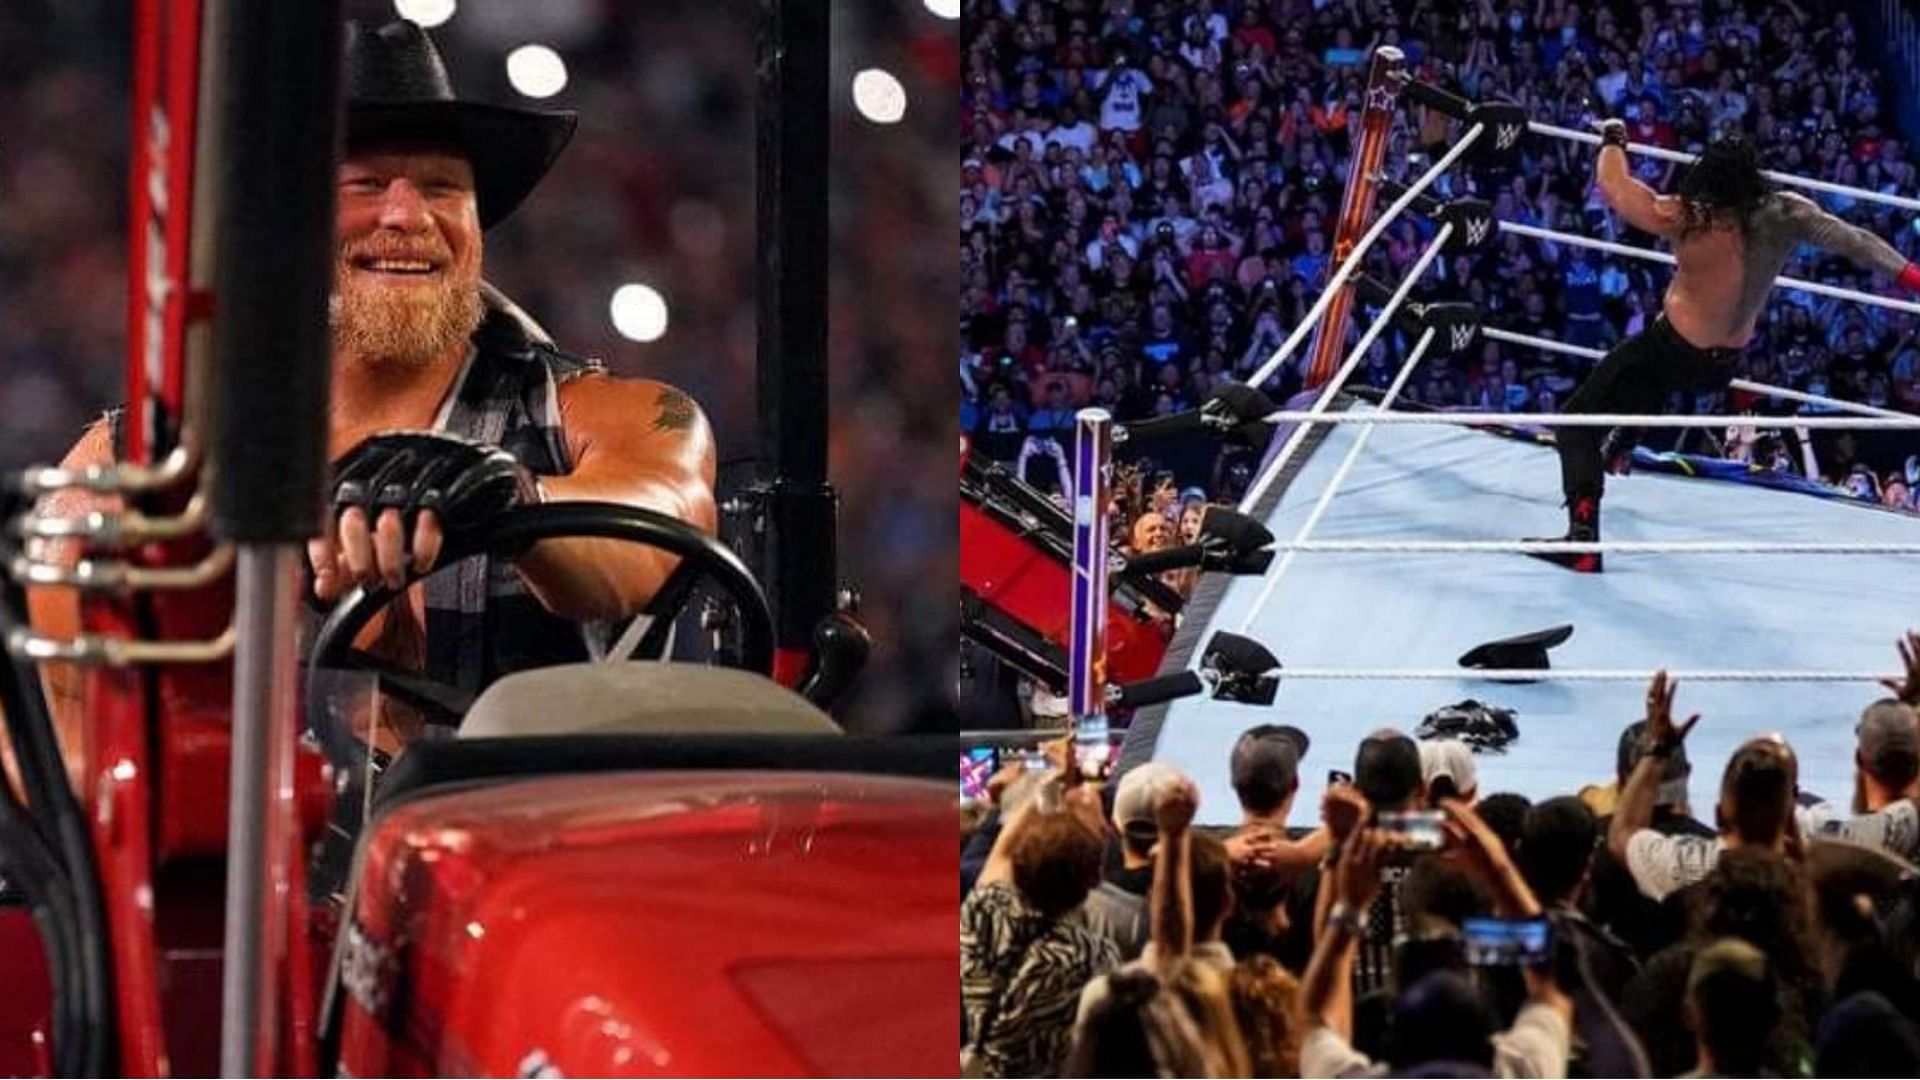 The Beast lifted the entire ring with a tractor at SummerSlam.